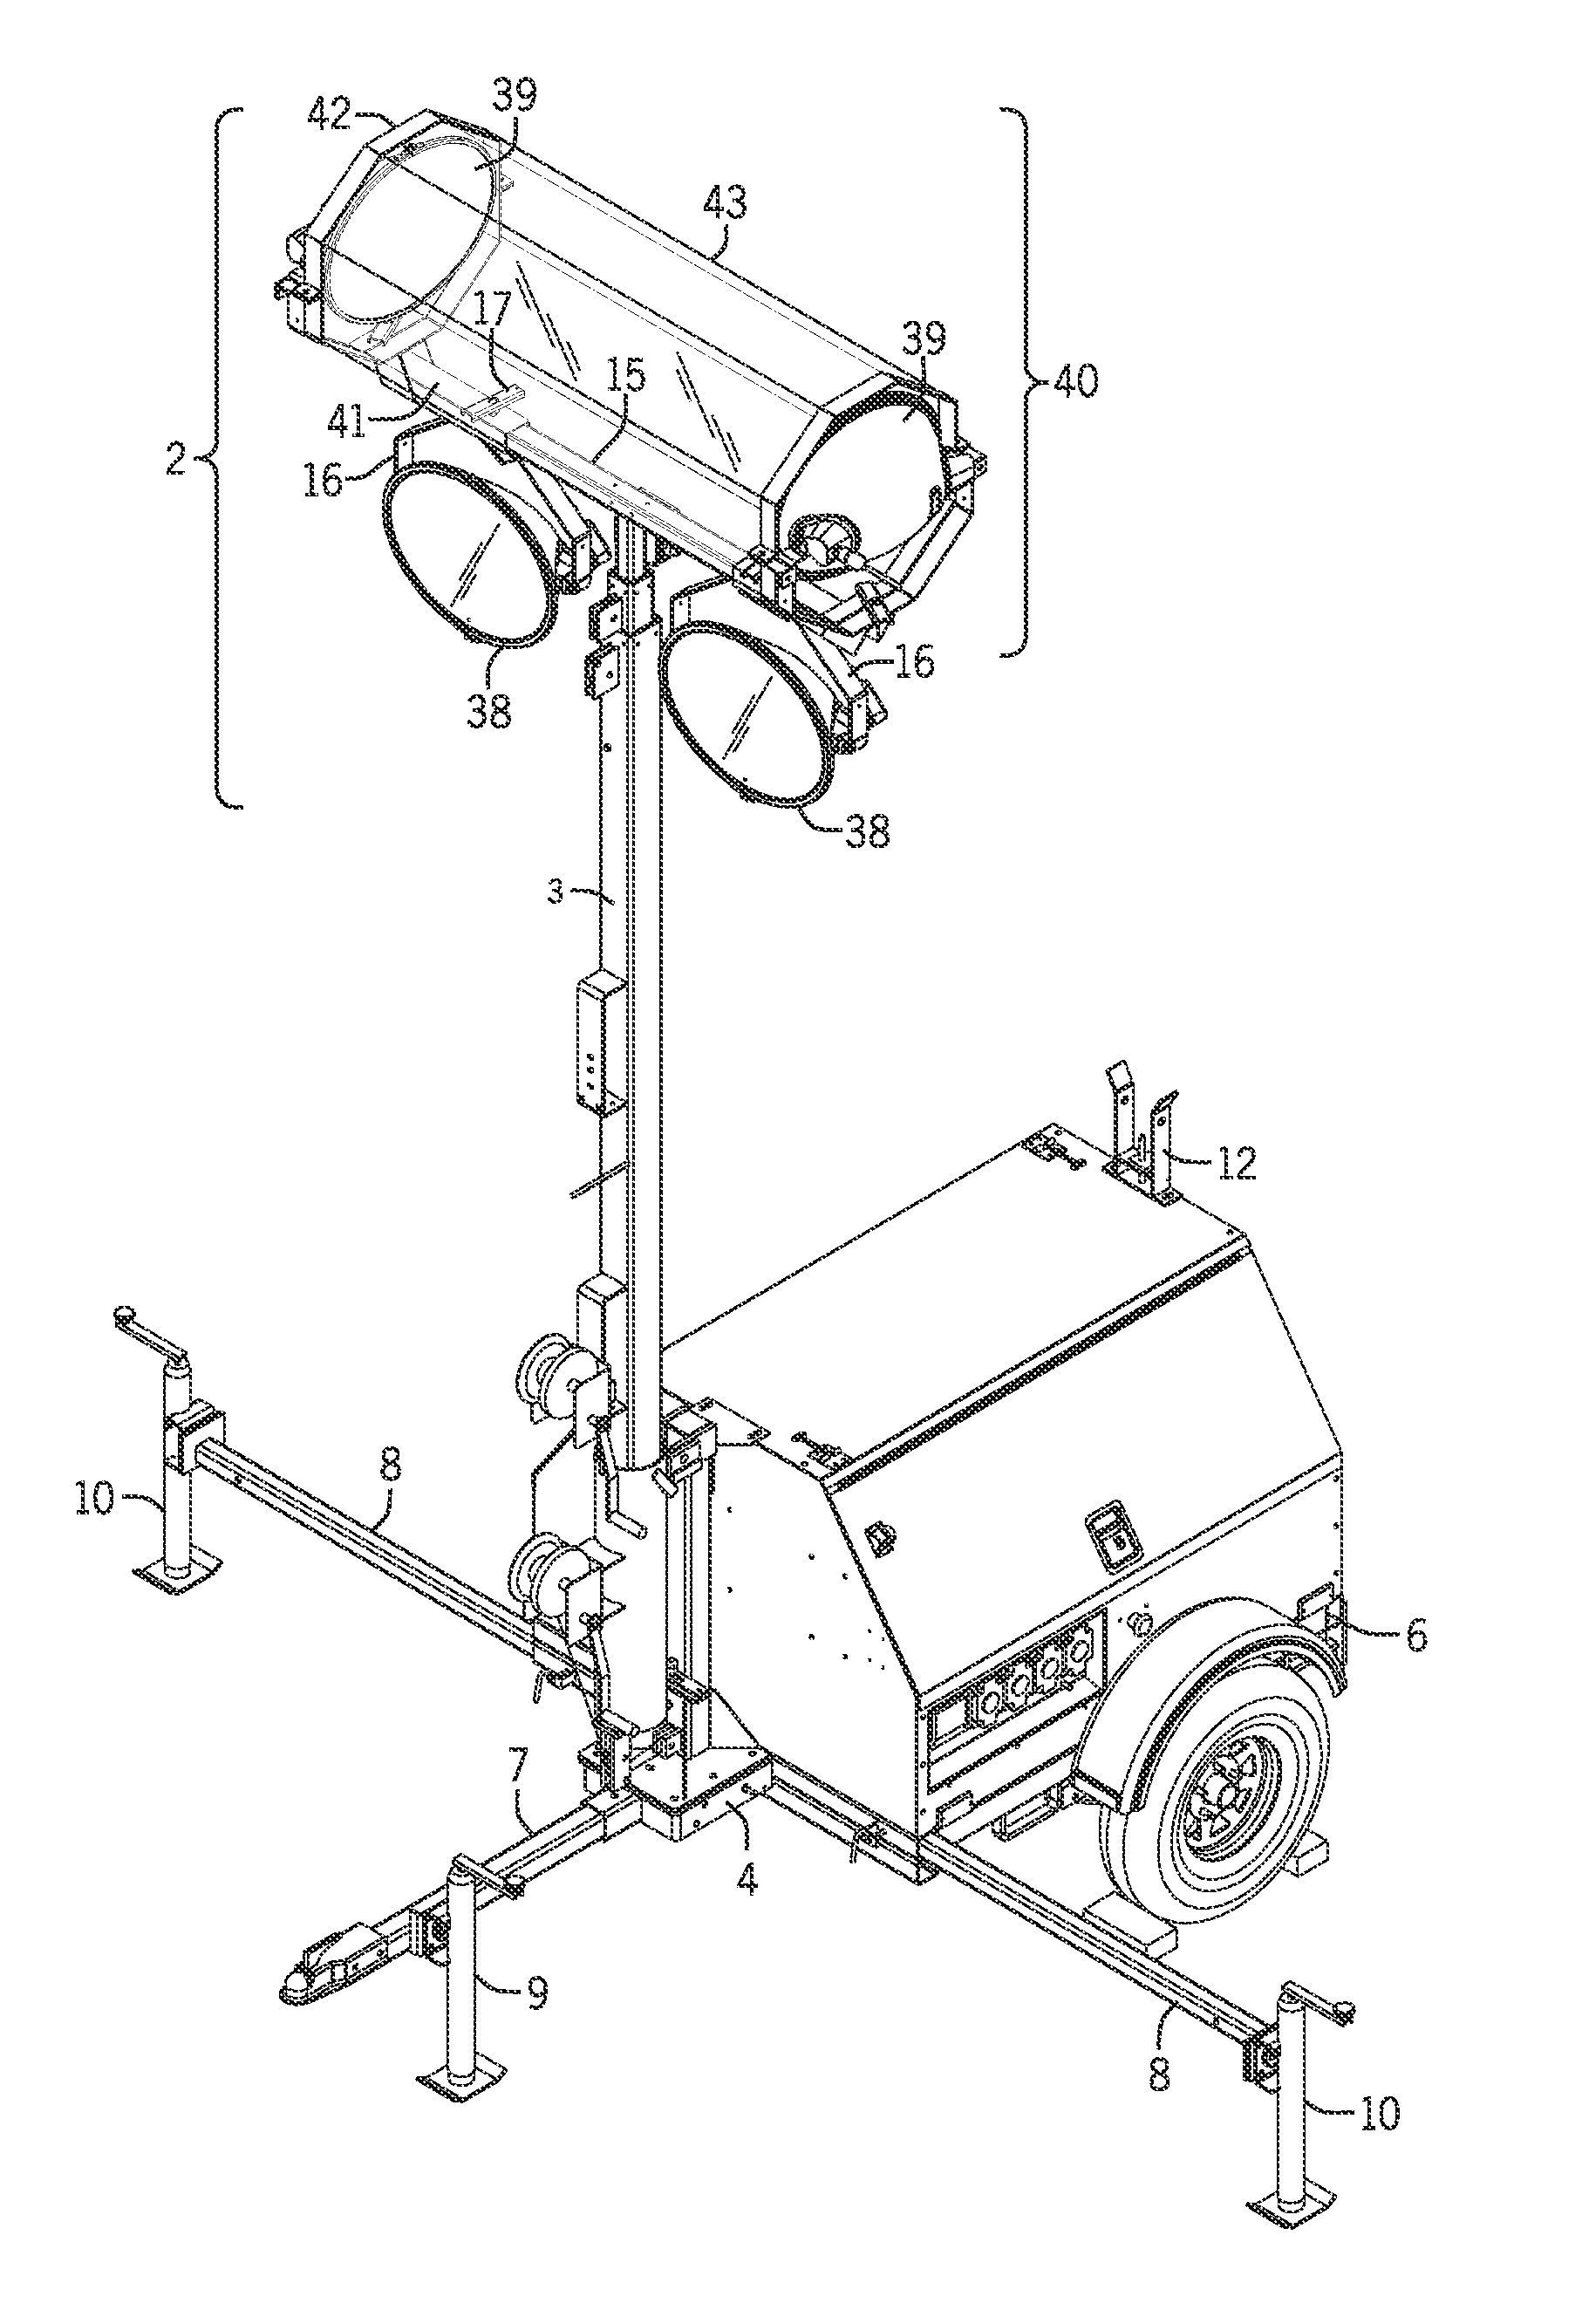 Light source assembly for portable lighting system